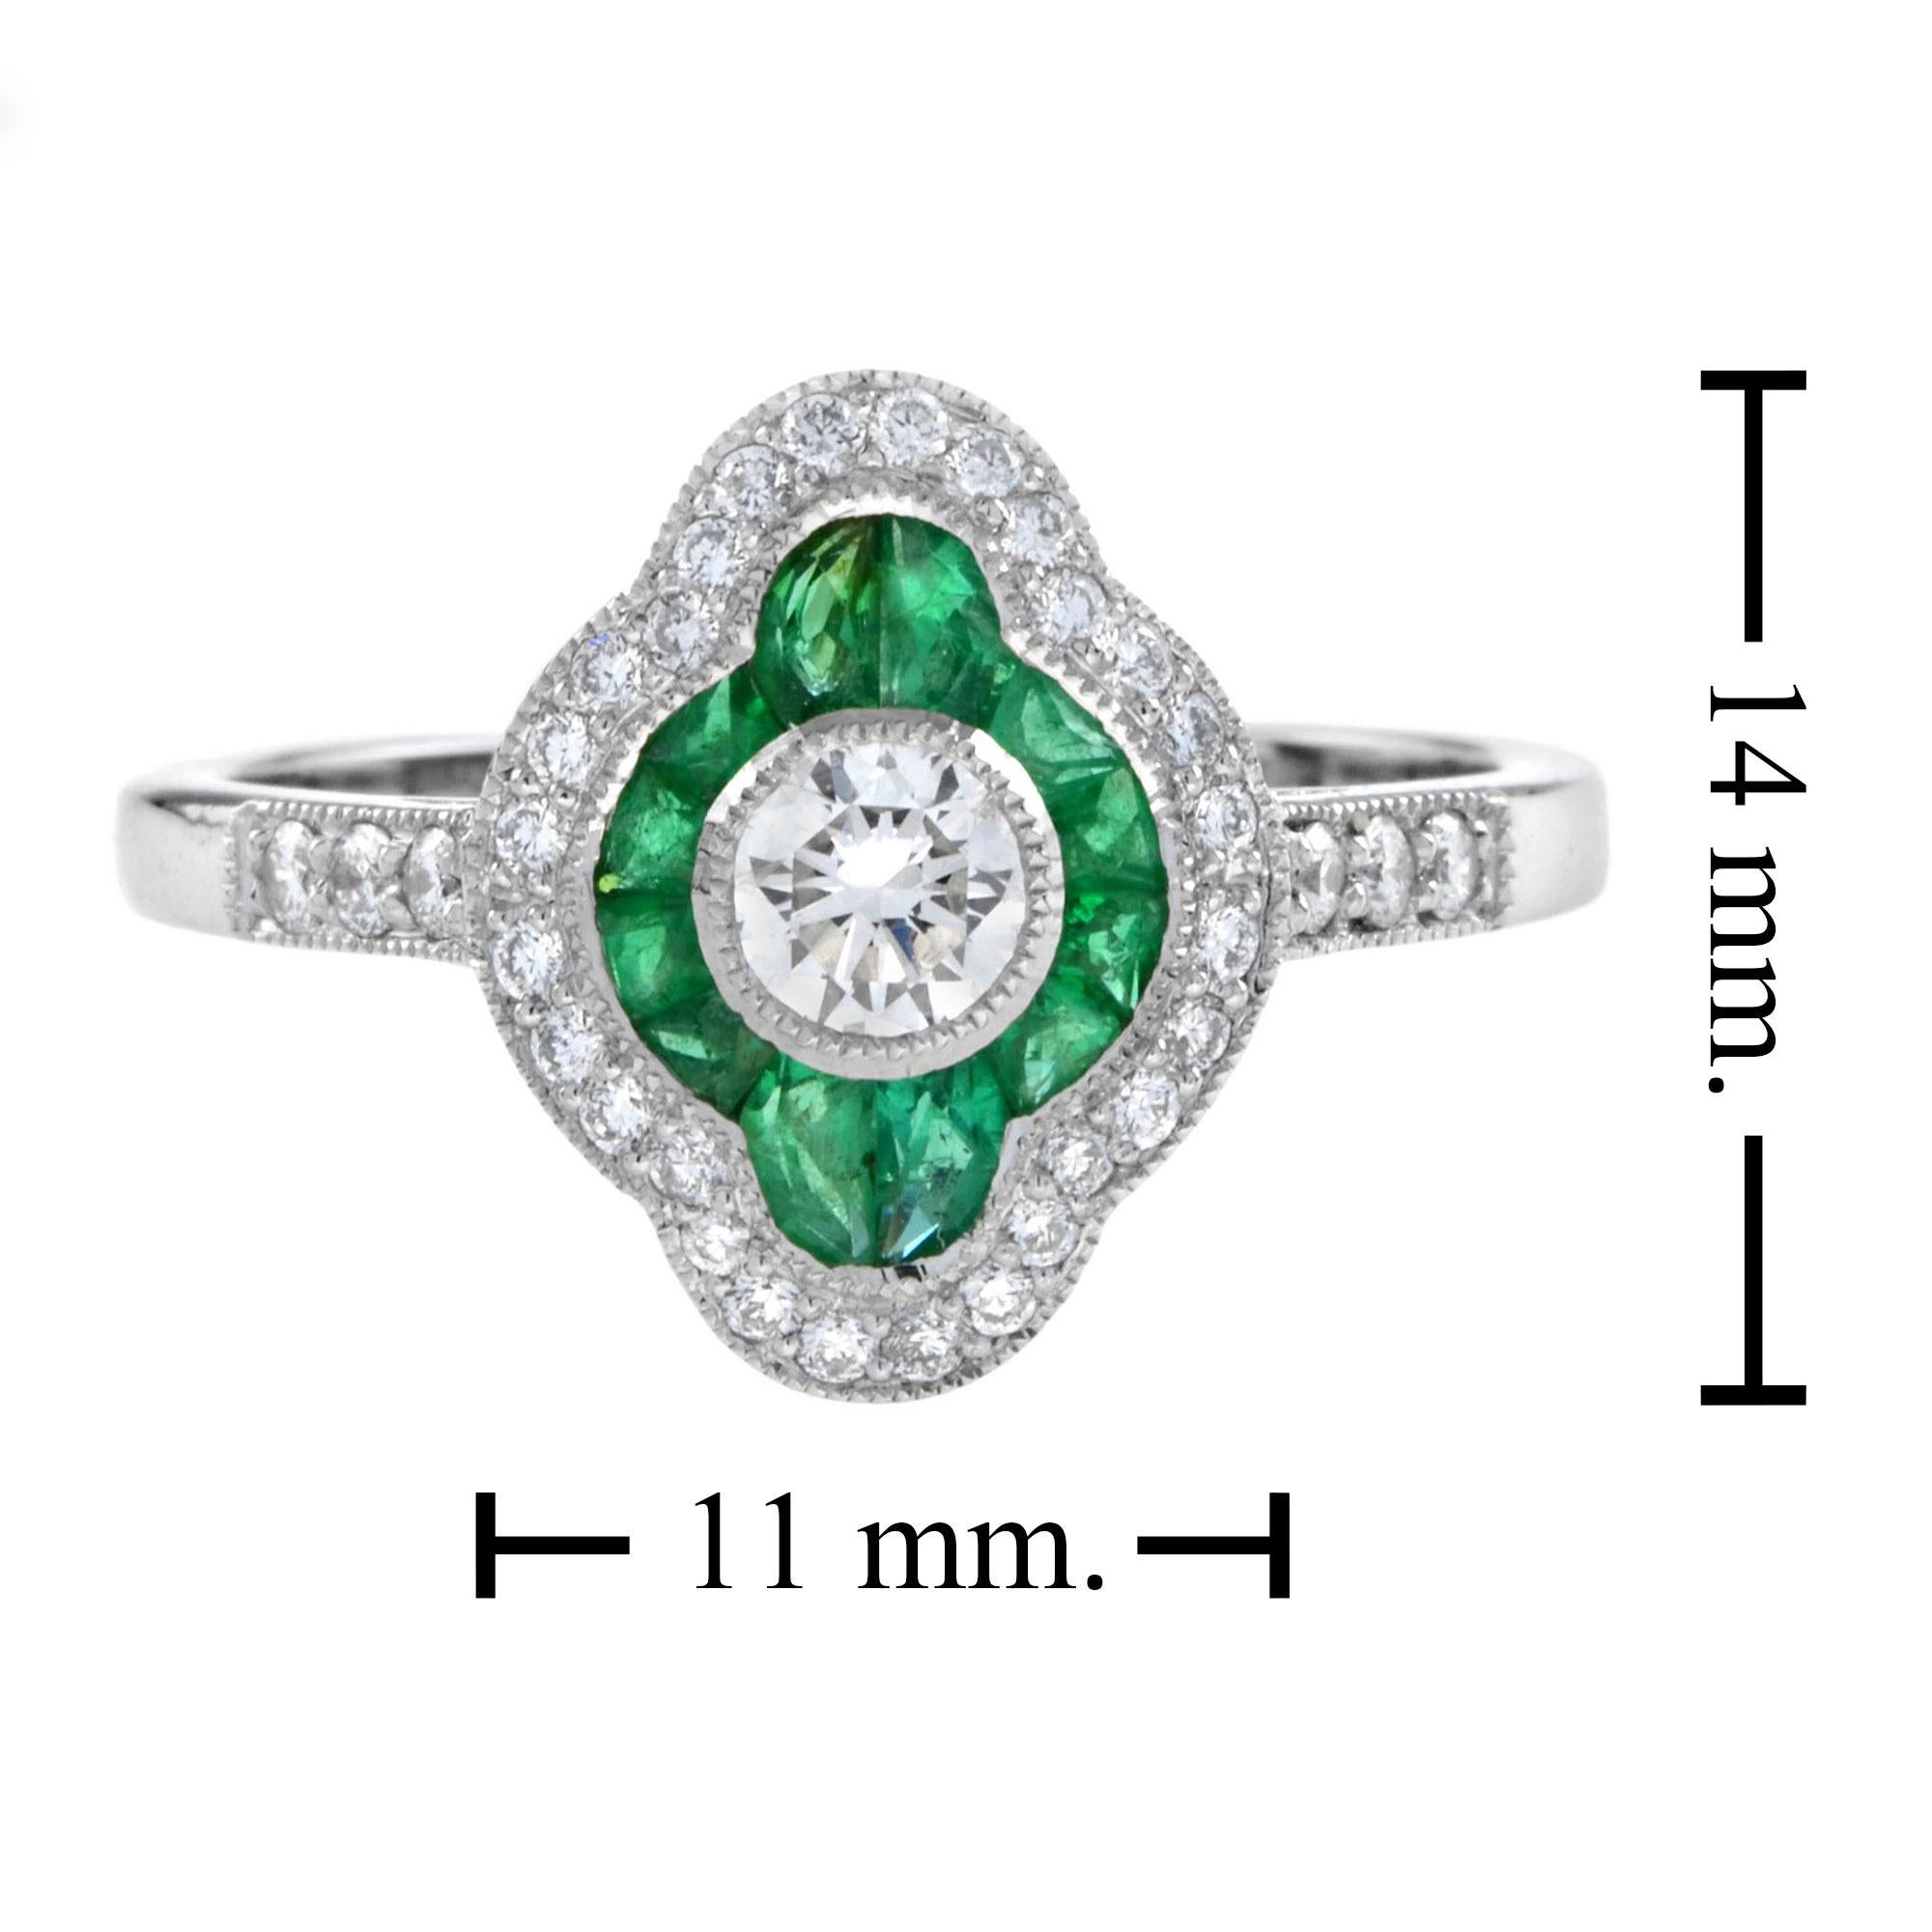 For Sale:  Art Deco Style Diamond and Emerald Engagement Ring in 18K White Gold 7